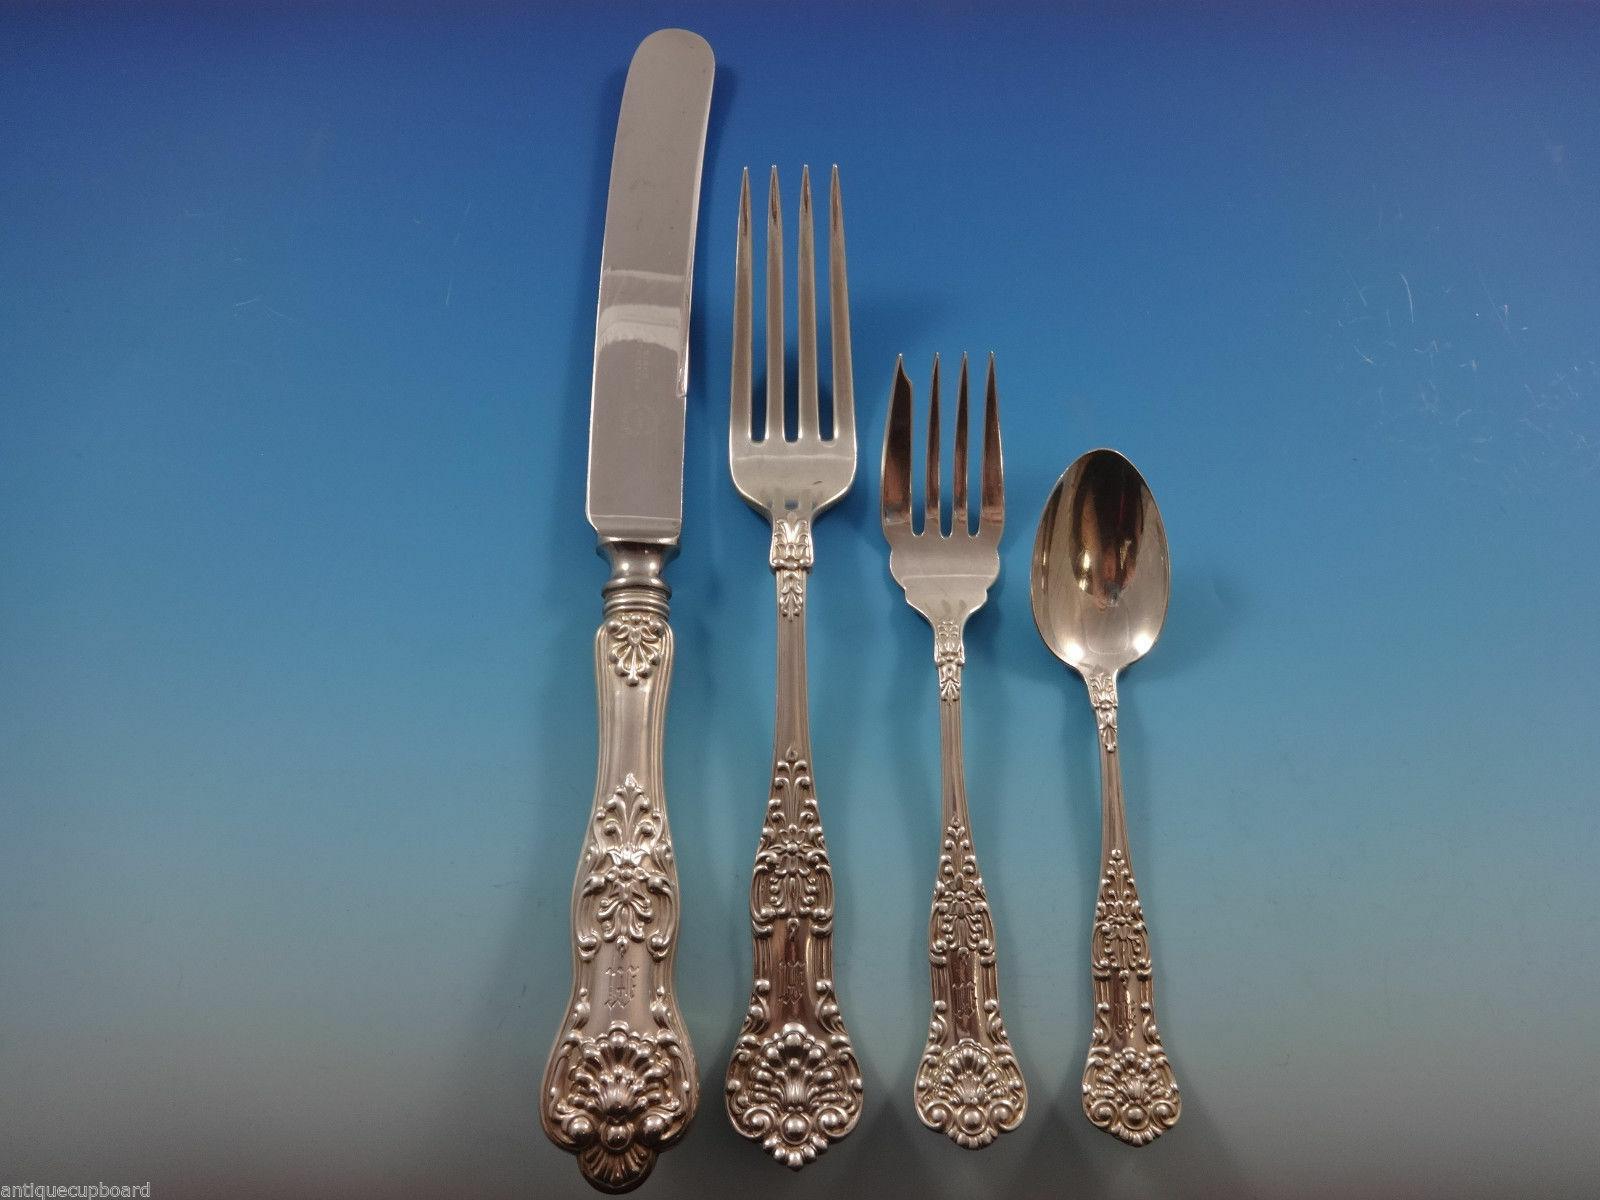 Beautiful Queens by Birks (Canadian) sterling silver flatware set with shell motif, 63 pieces. This set includes:

8 dinner size knives, 10